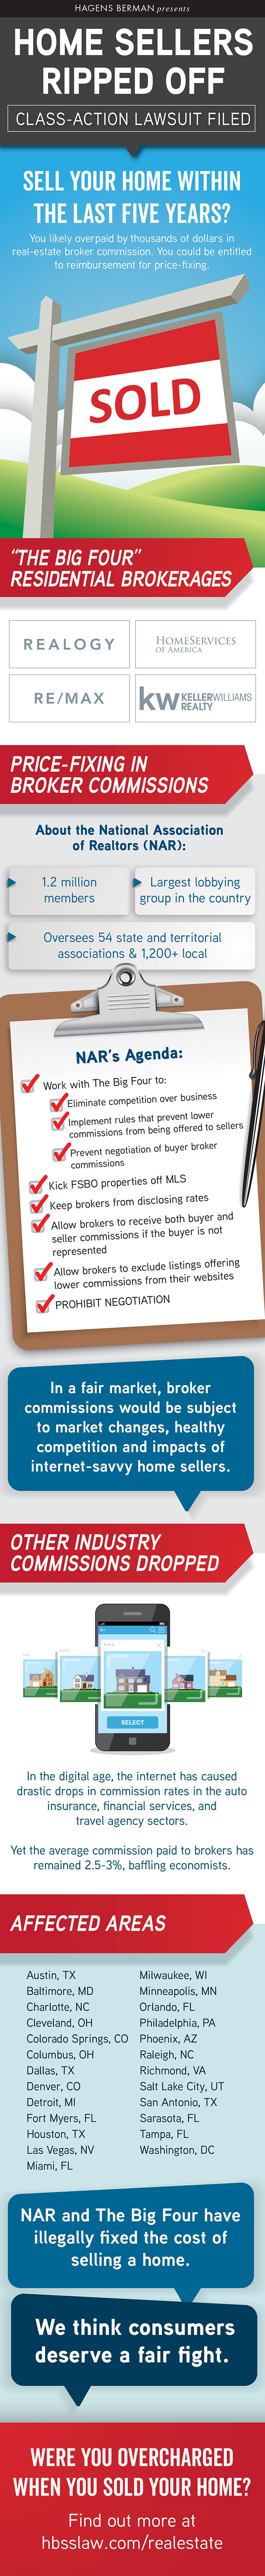 Real Estate Commissions Infographic